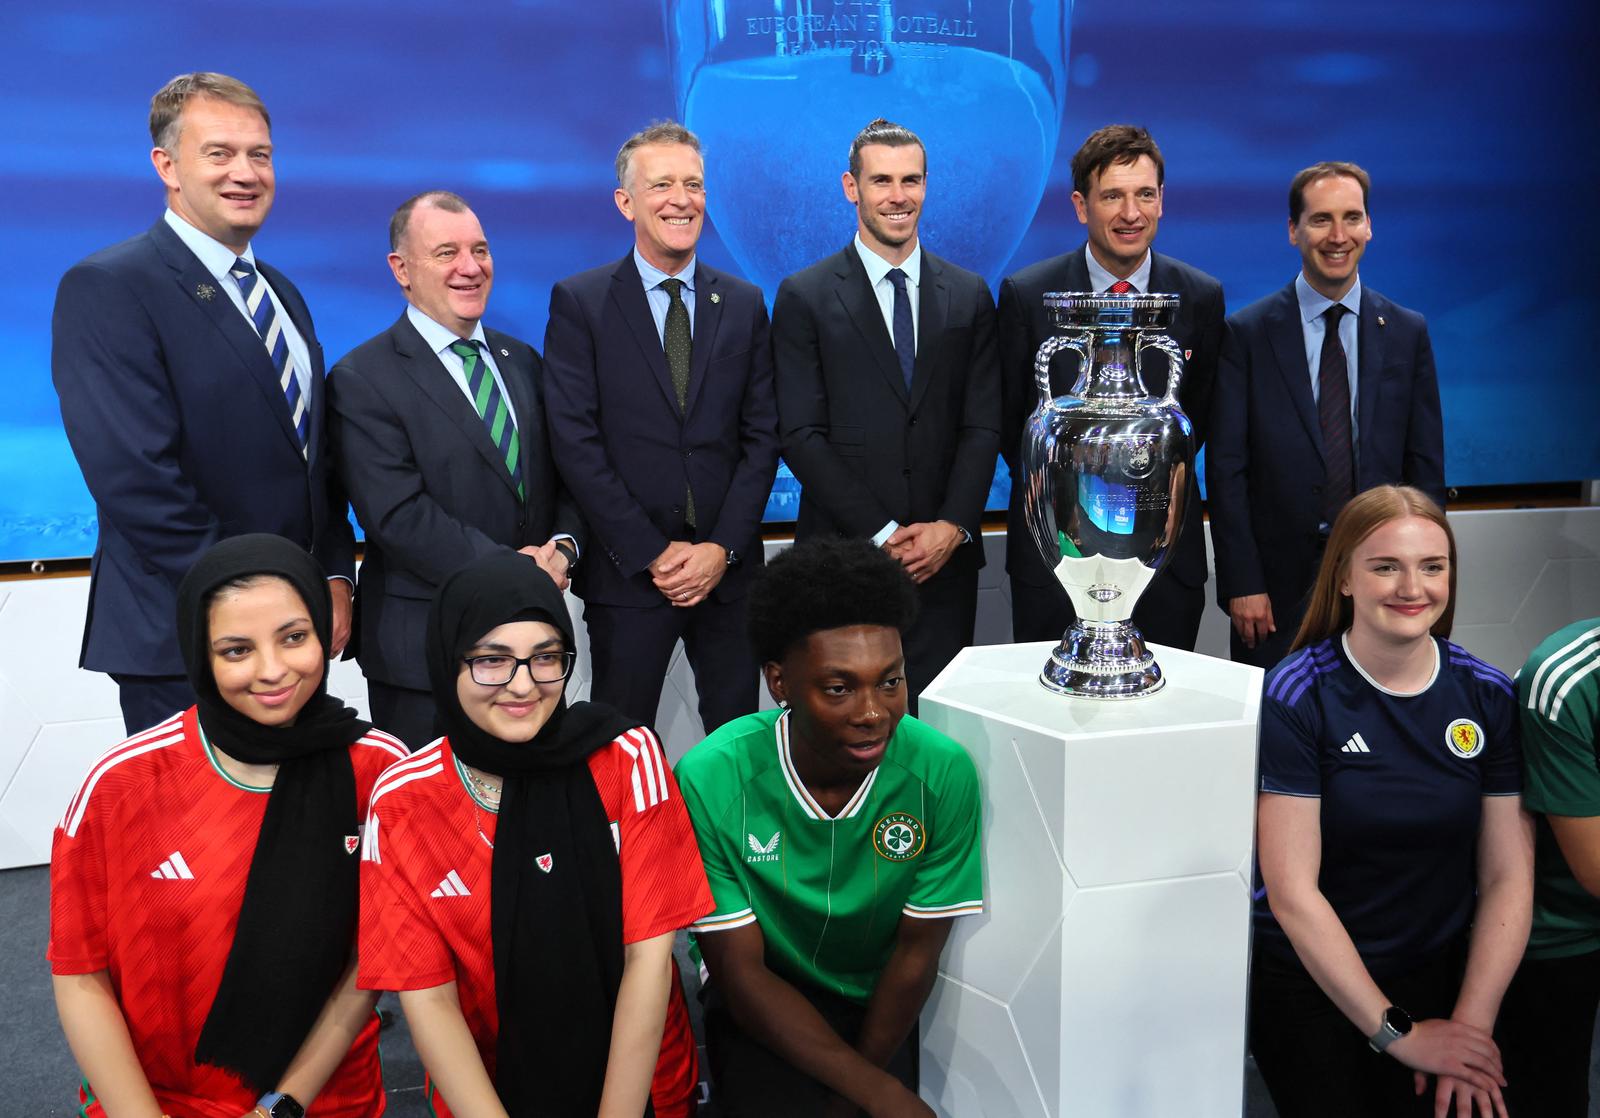 Soccer Football - Euro 2028 & Euro 2032 Hosts Announcement - Nyon, Switzerland - October 10, 2023 UK and Ireland ambassador Gareth Bale and delegation pose with the trophy after UK and Ireland are announced as the hosts for Euro 2028 REUTERS/Denis Balibouse Photo: DENIS BALIBOUSE/REUTERS